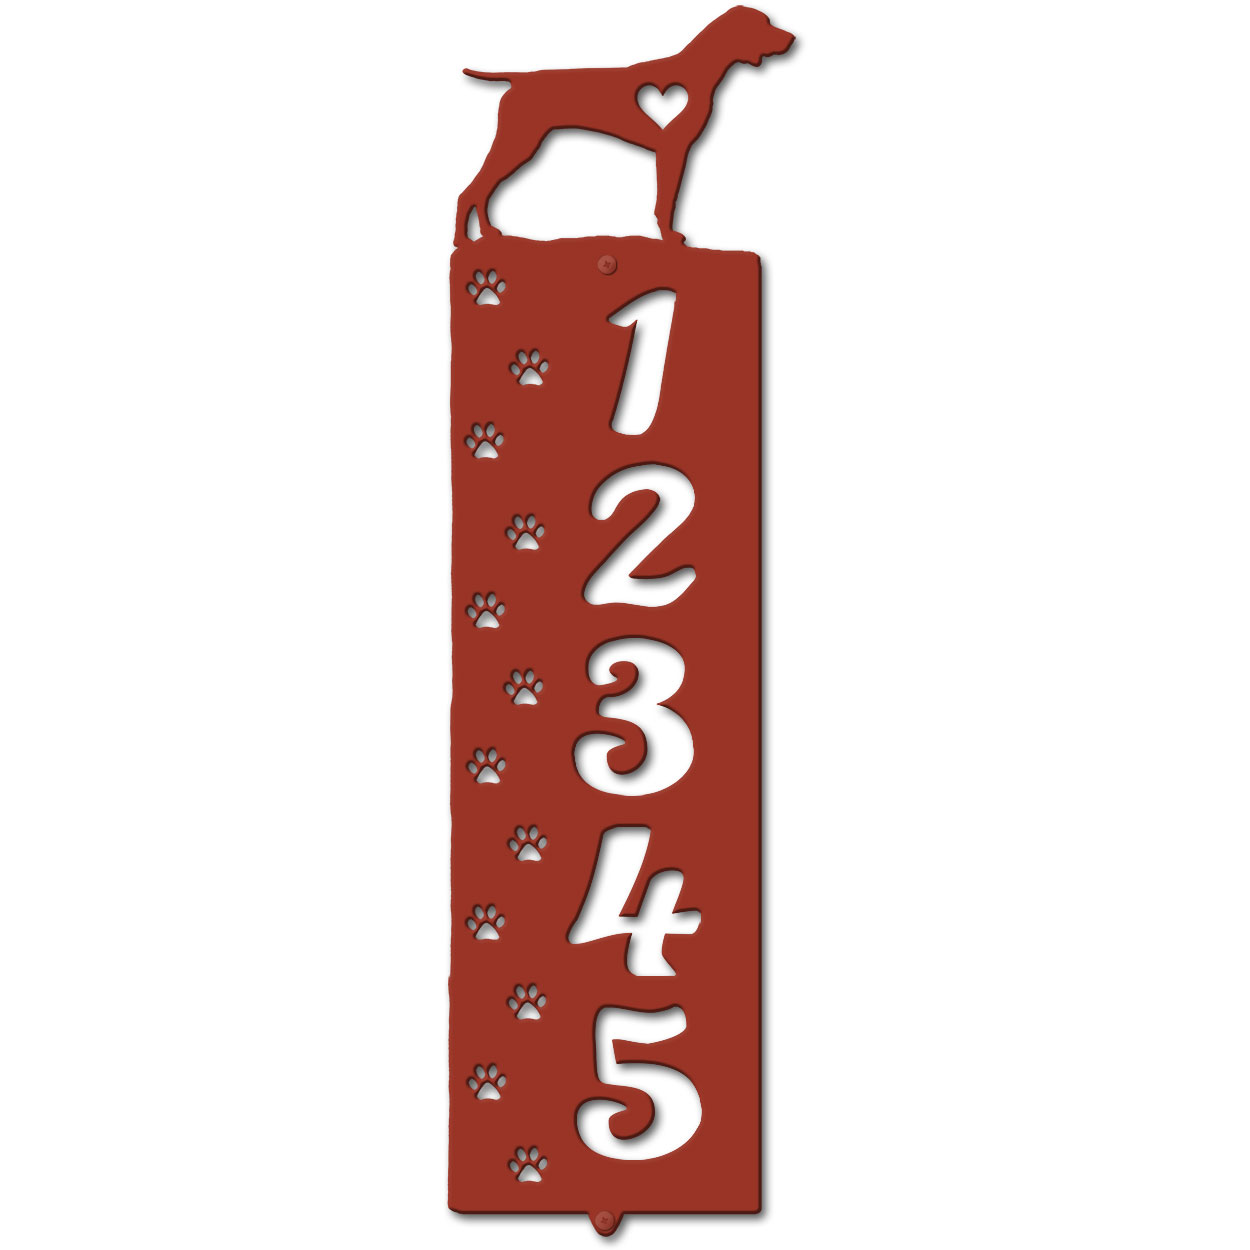 636285 - Pointer Cut Outs Five Digit Address Number Plaque